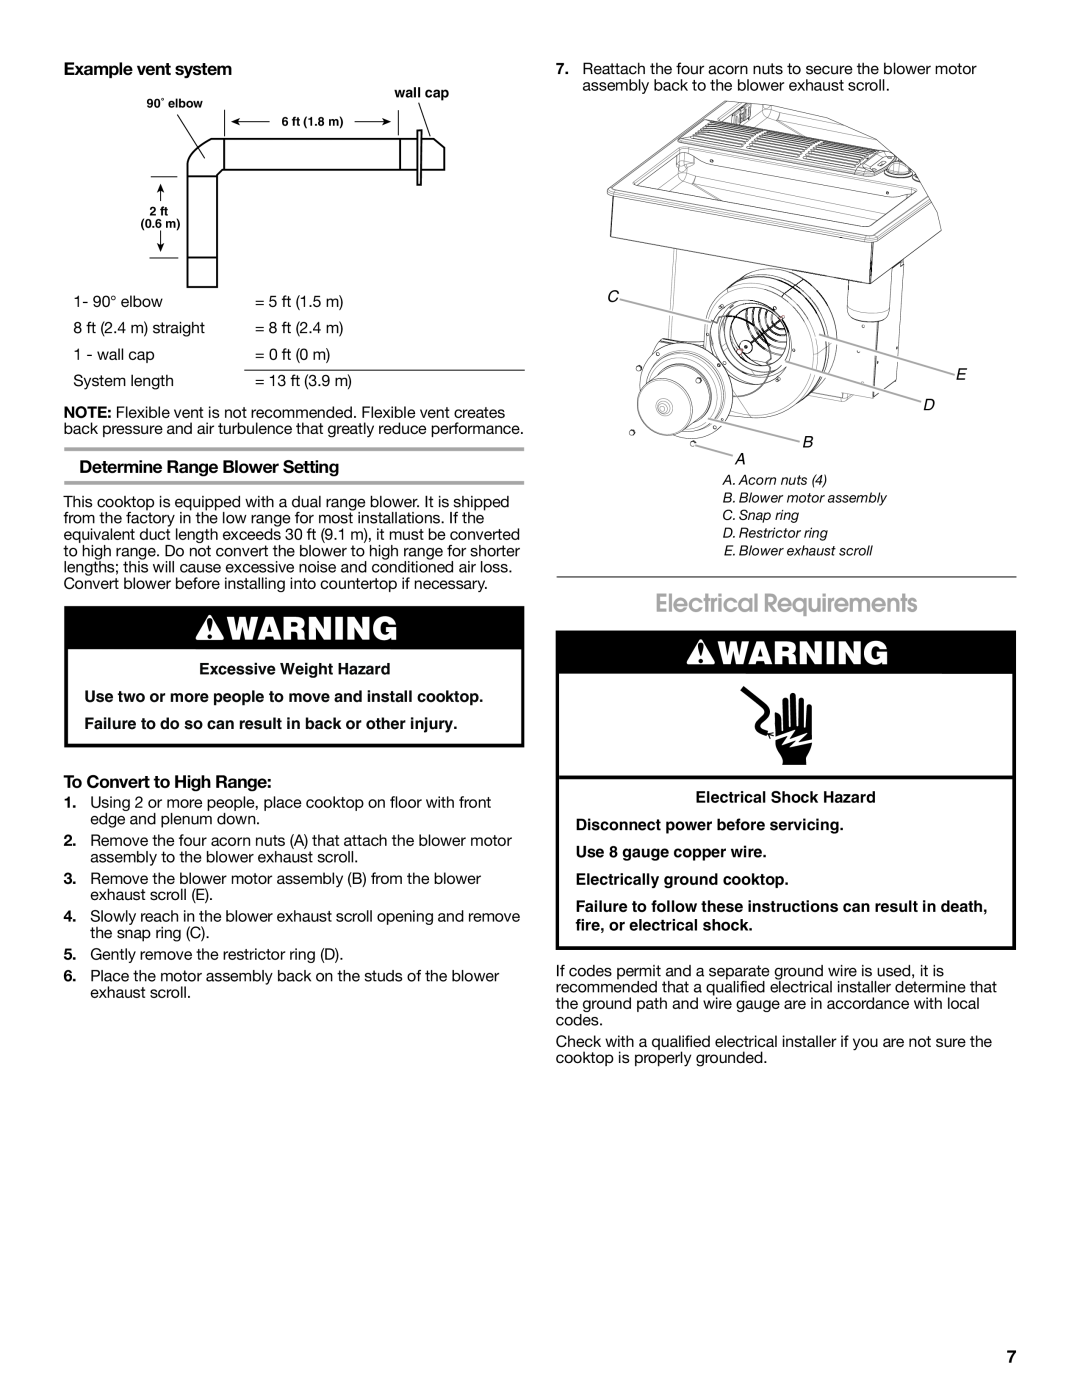 Jenn-Air W10298937A Electrical Requirements, Example vent system, Determine Range Blower Setting, To Convert to High Range 